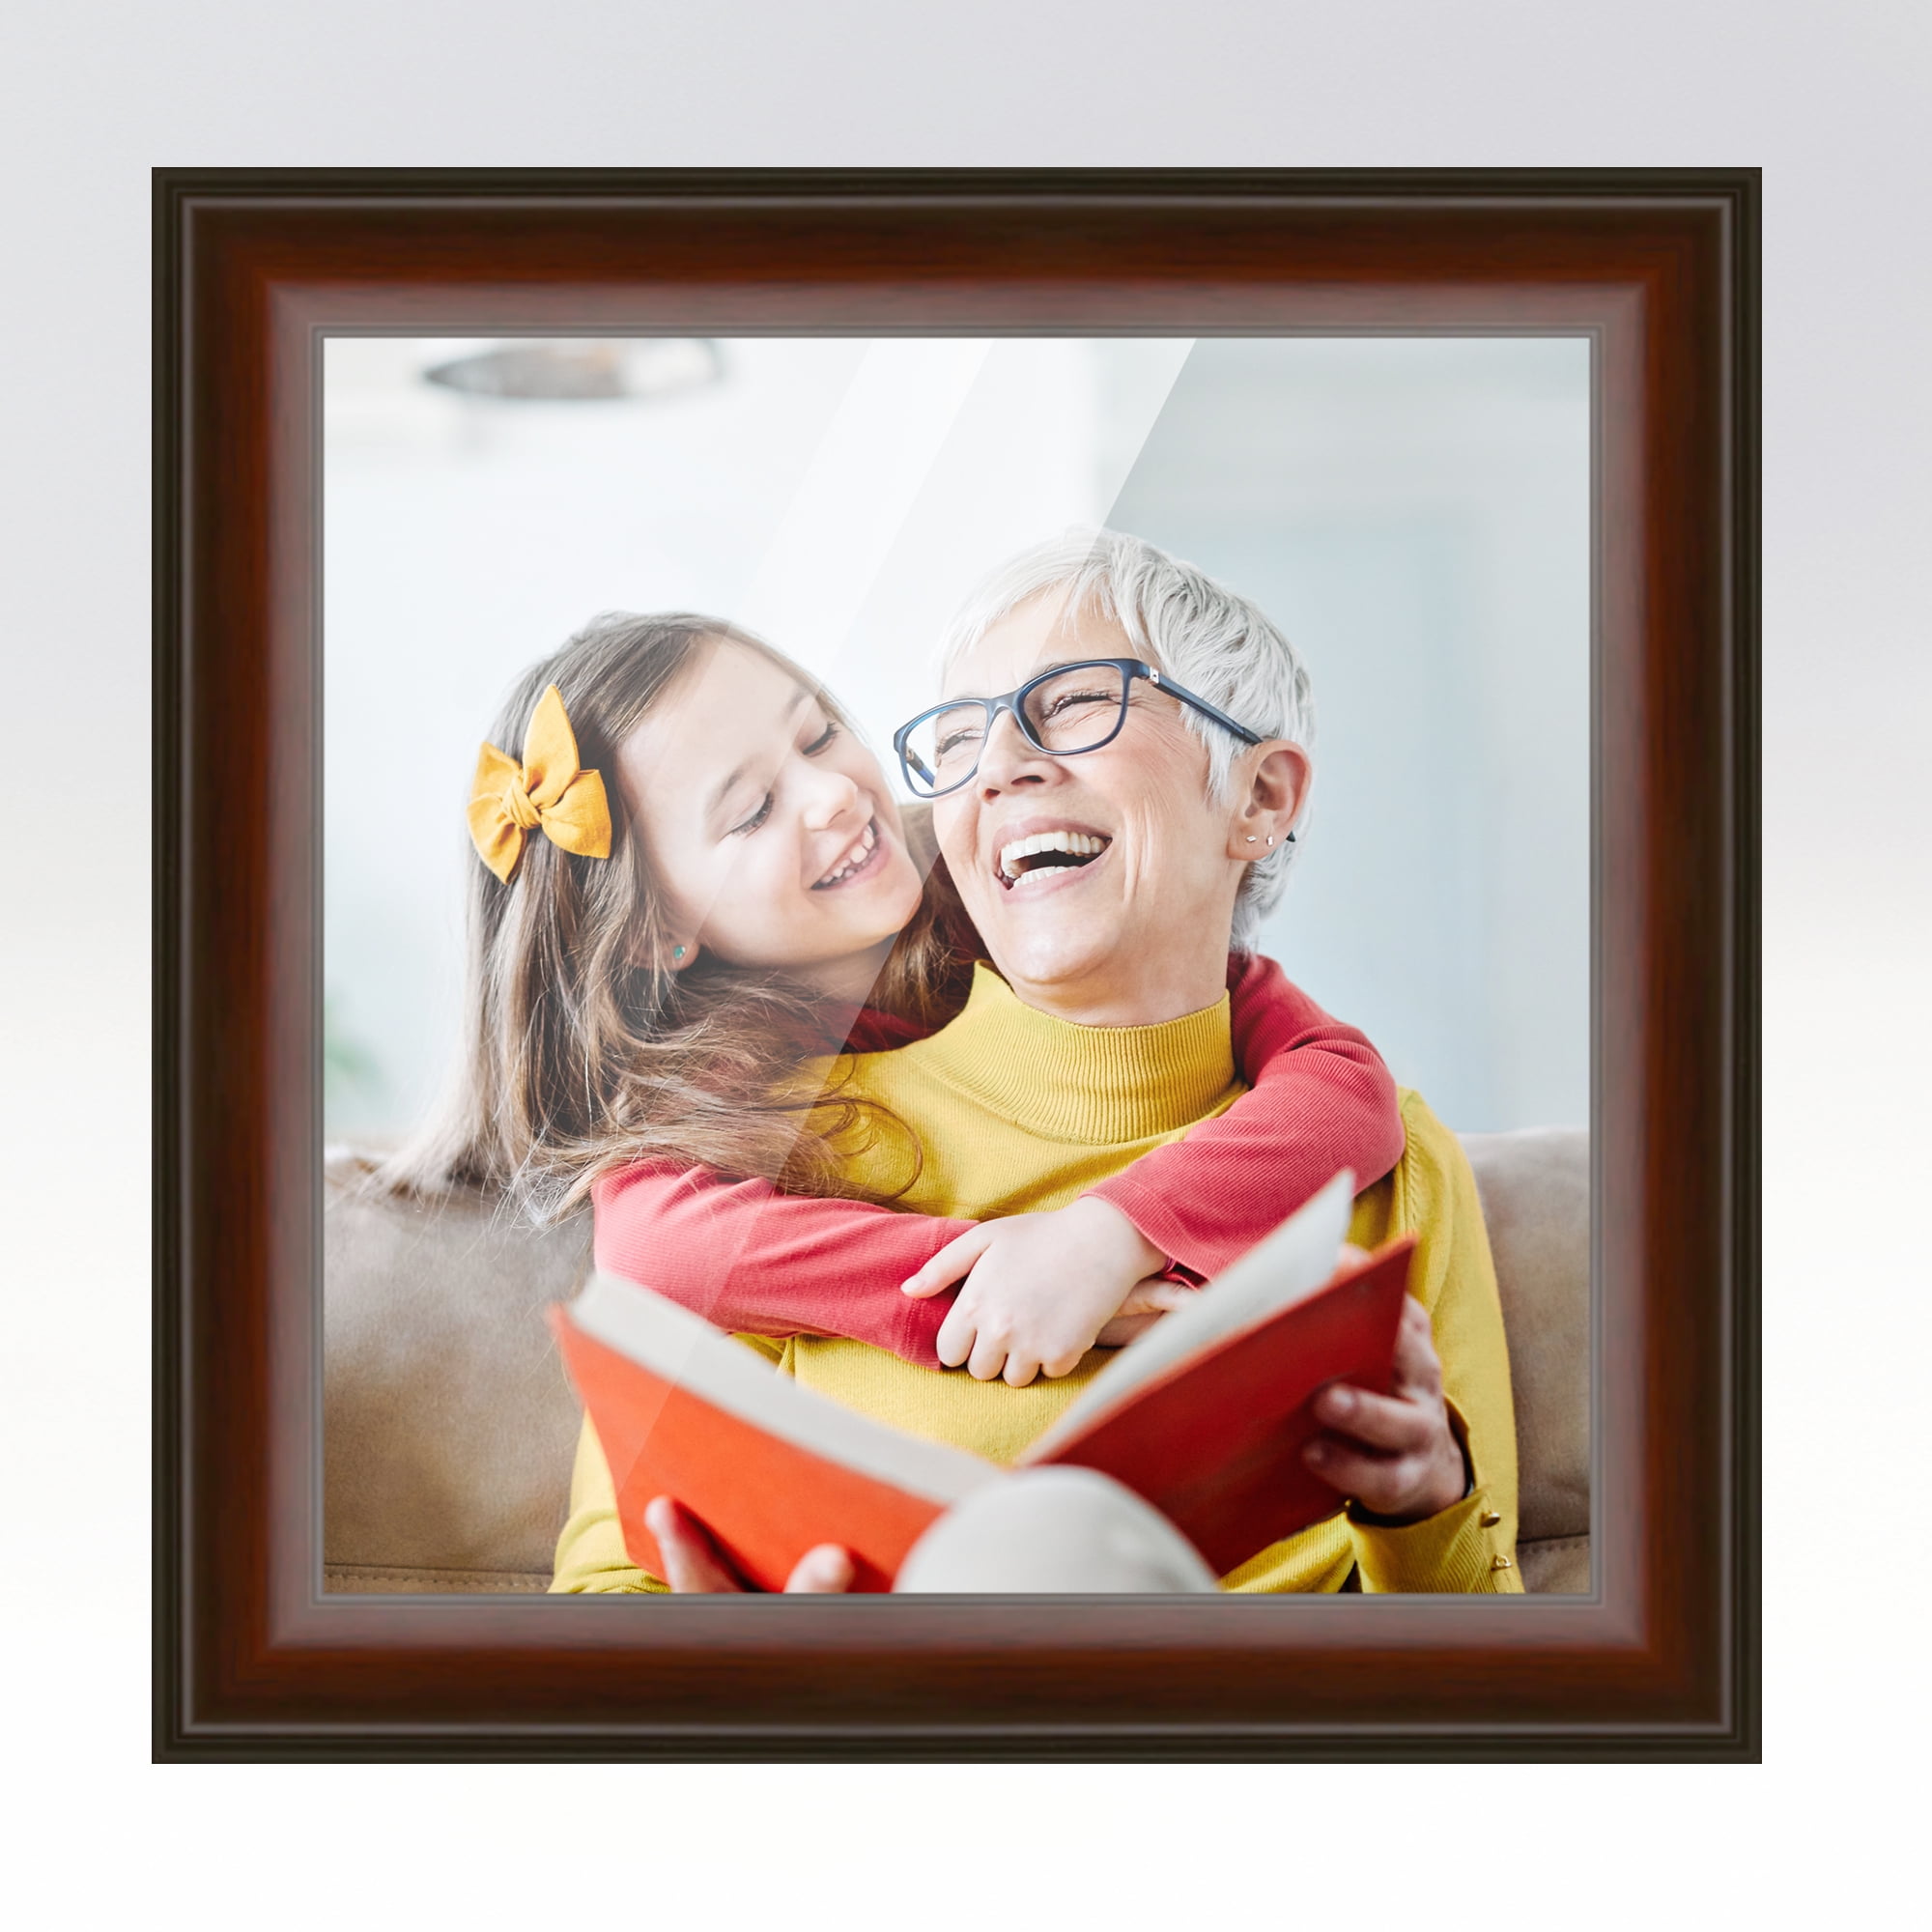 30x30 Classic Brown Real Wood Picture Frame Width 2 inches, Interior Frame  Depth 0.5 inches